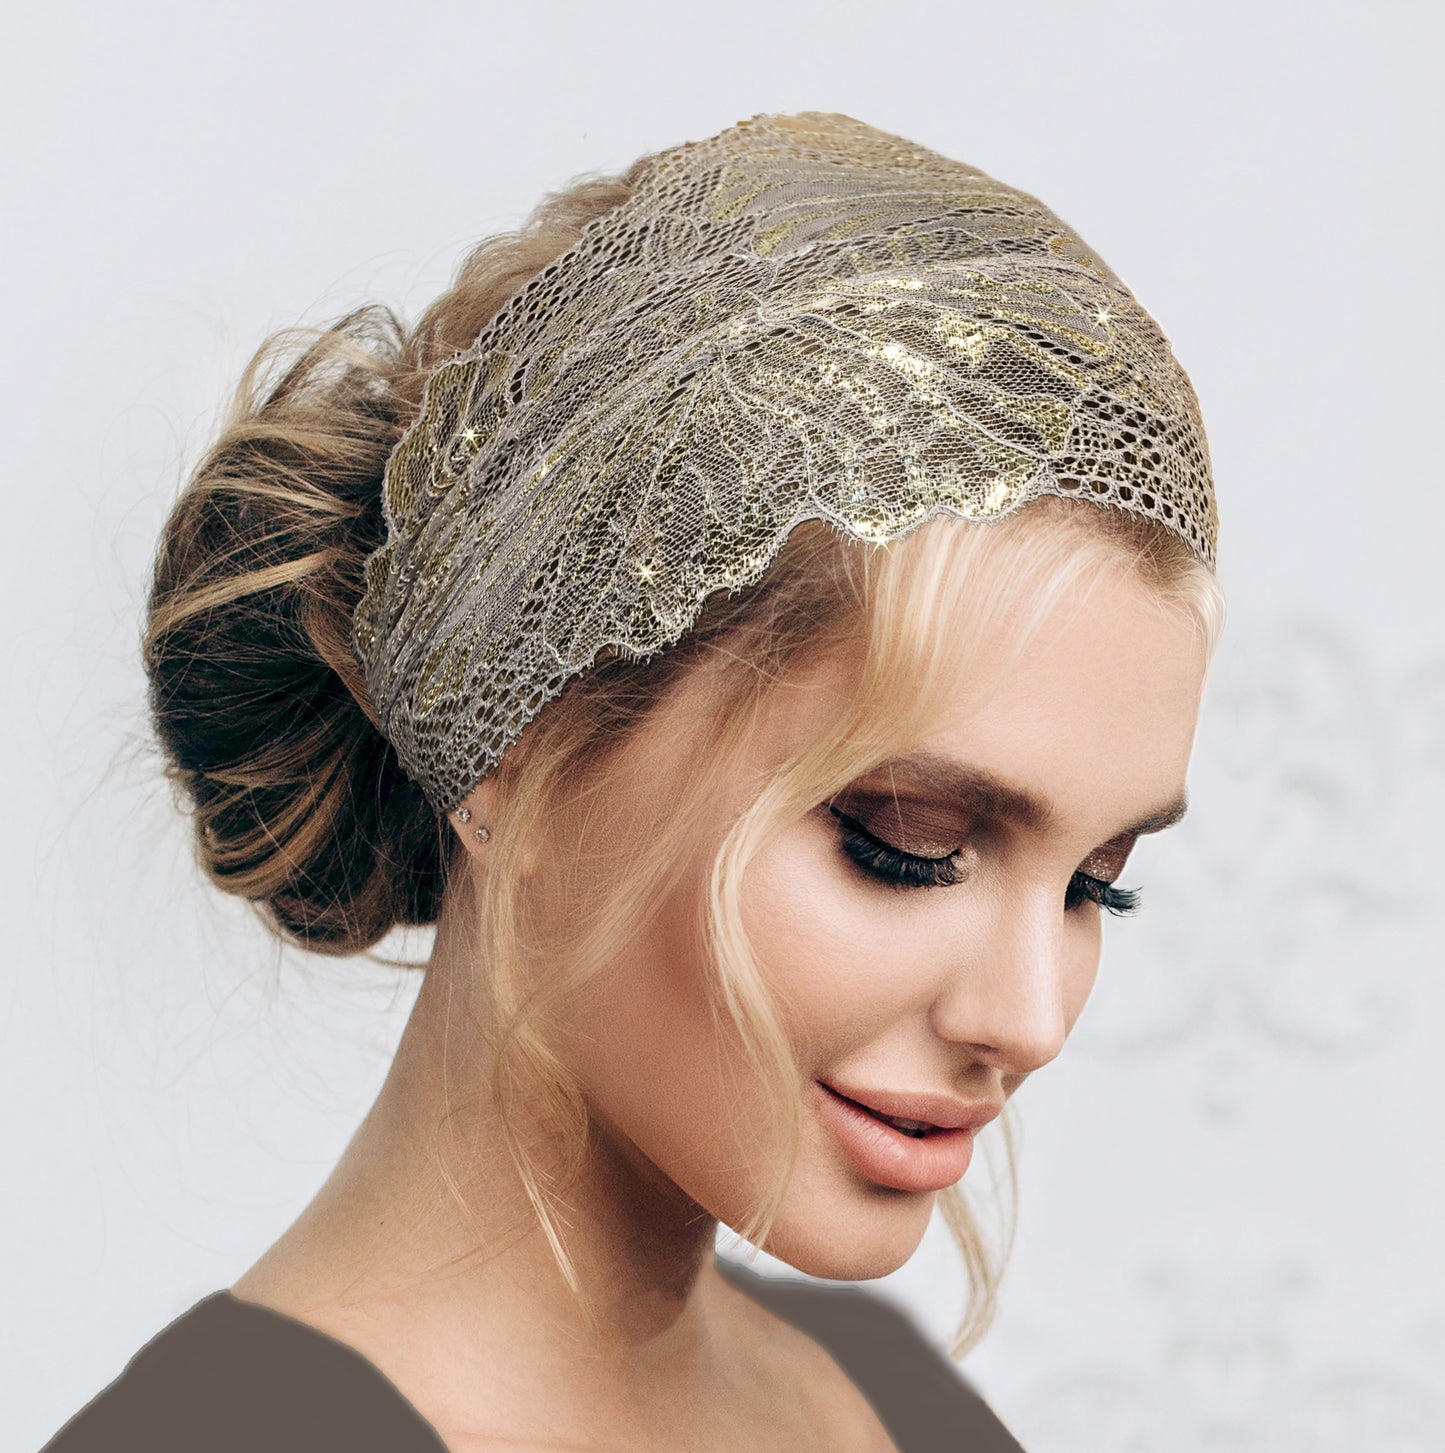 Taupe gold sparkly floral lace headband